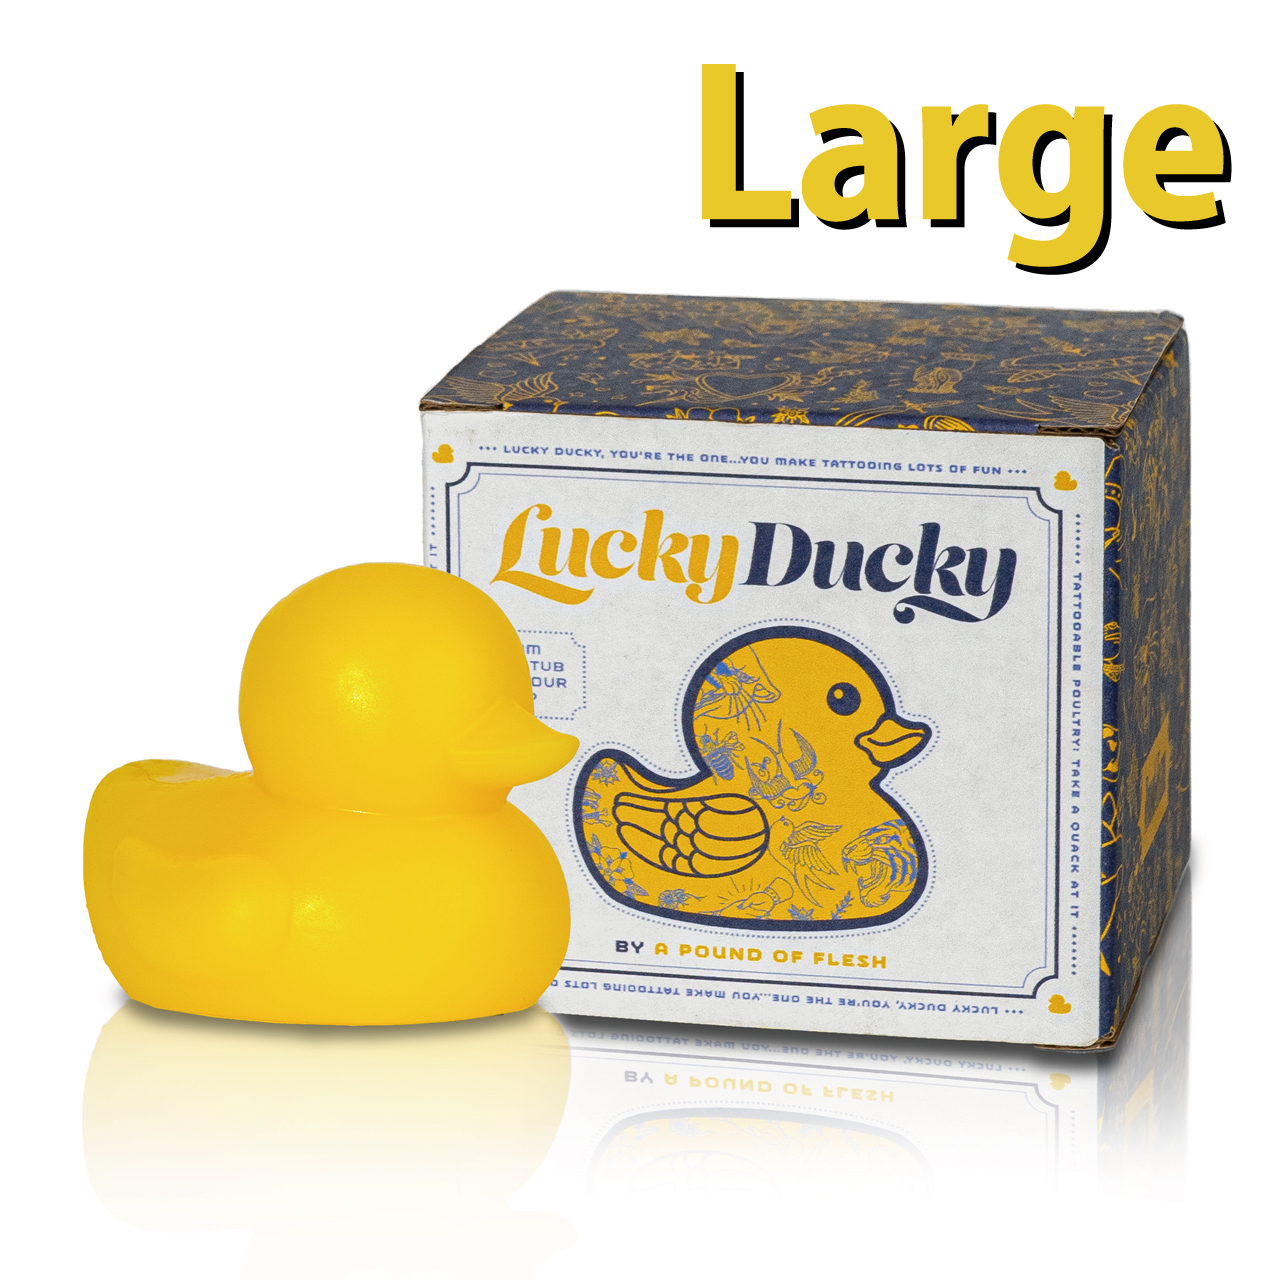 A Pound of Flesh Lucky Ducky タトゥーモデル - Large